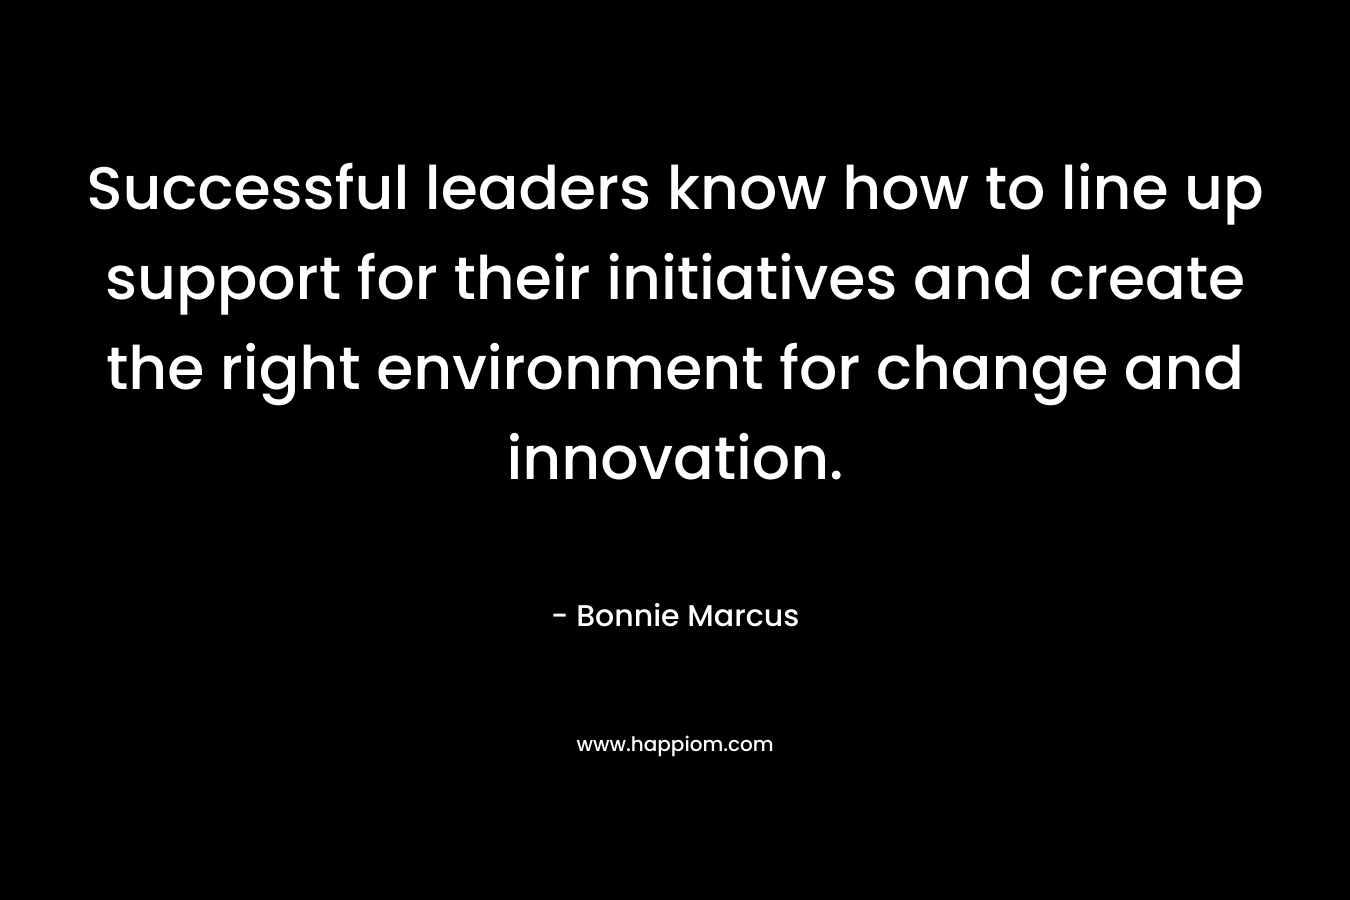 Successful leaders know how to line up support for their initiatives and create the right environment for change and innovation. – Bonnie Marcus